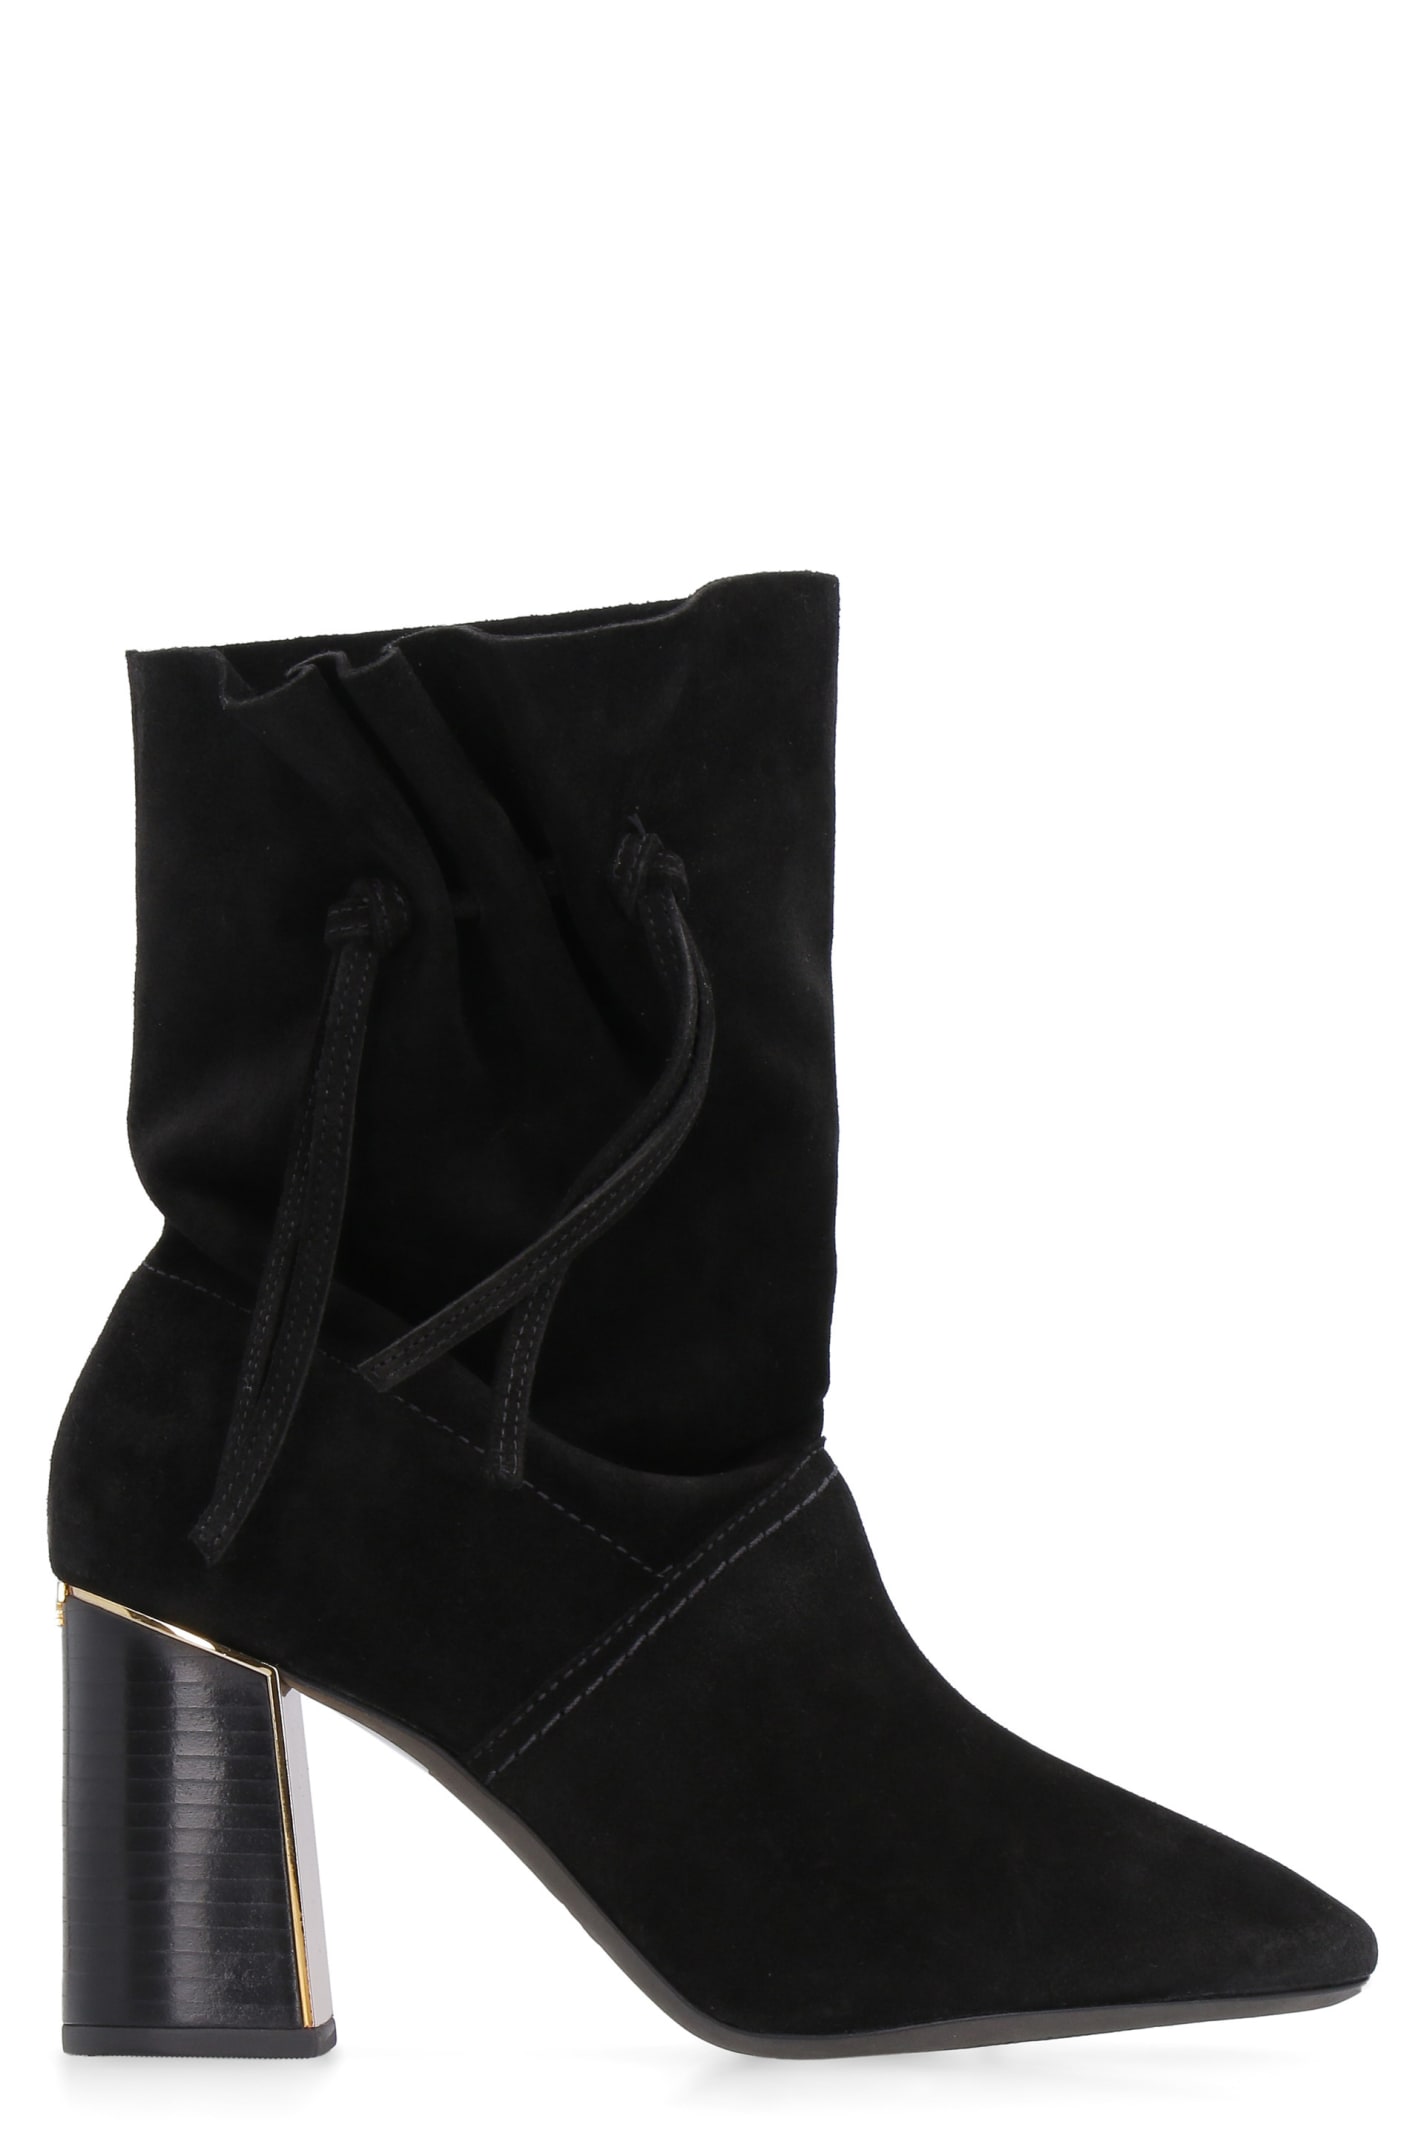 Photo of  Tory Burch Gigi Suede Ankle Boots- shop Tory Burch Boots, Ankle Boots online sales